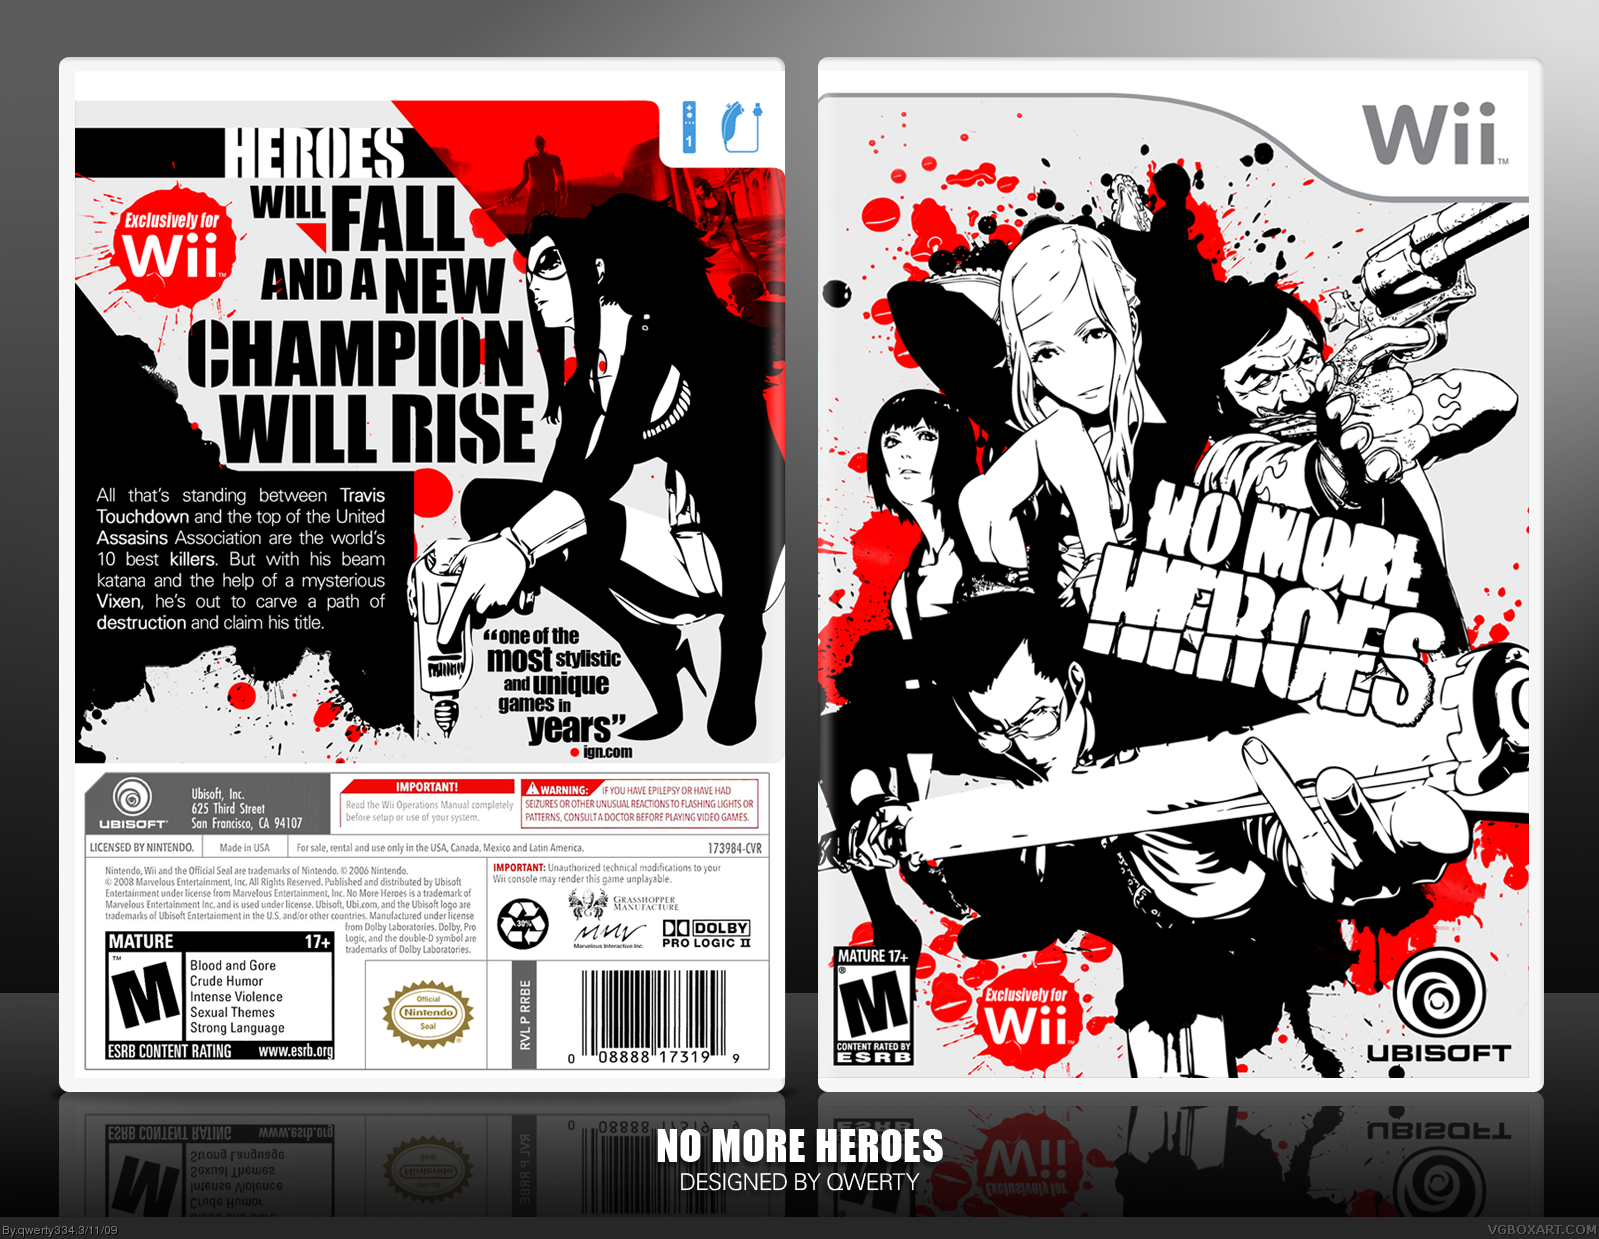 No More Heroes box cover